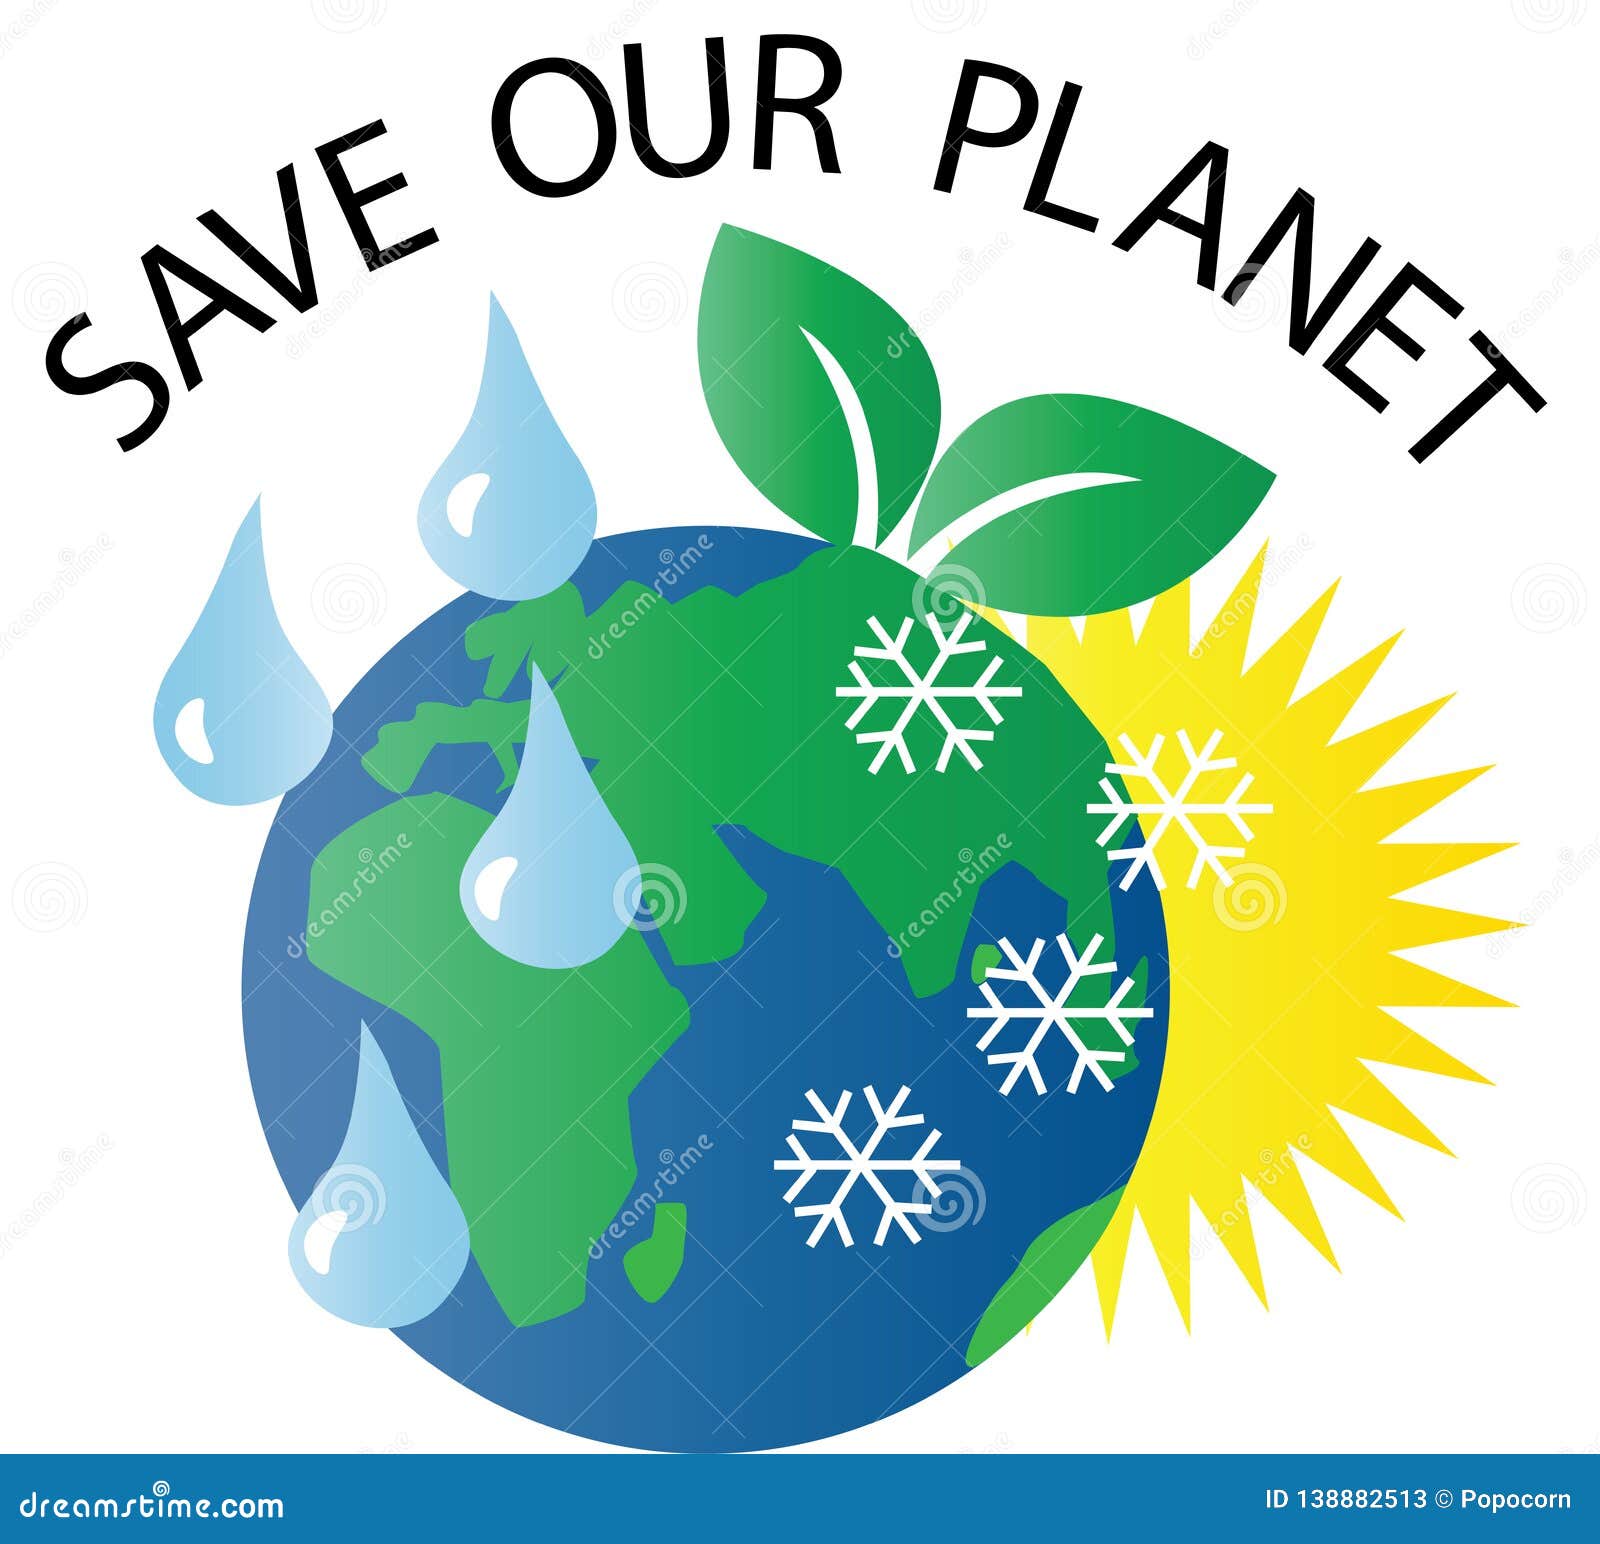 save our planet header banner or event